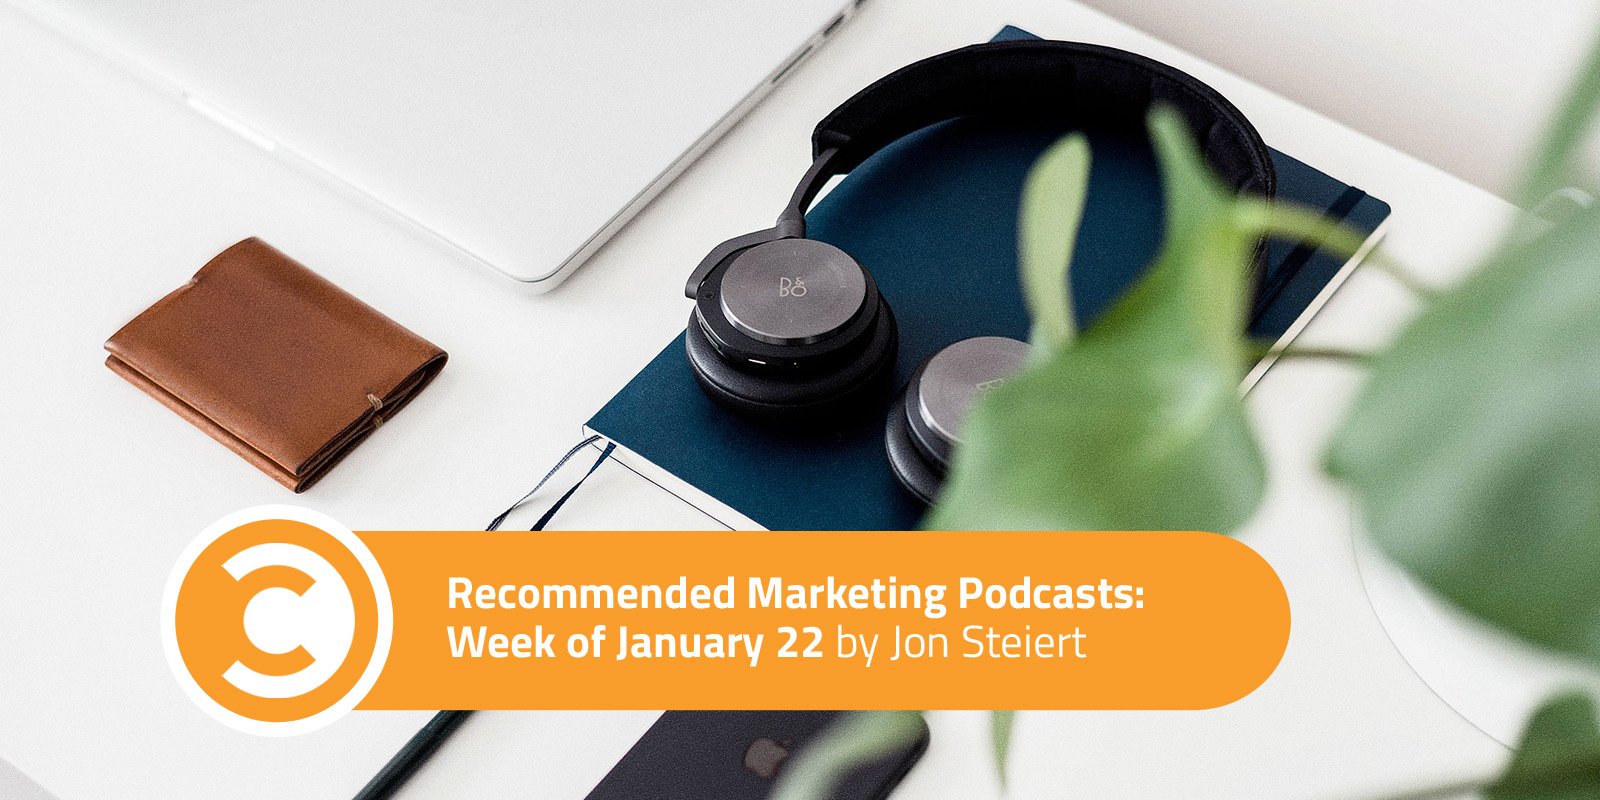 Recommended Marketing Podcasts Week of January 22